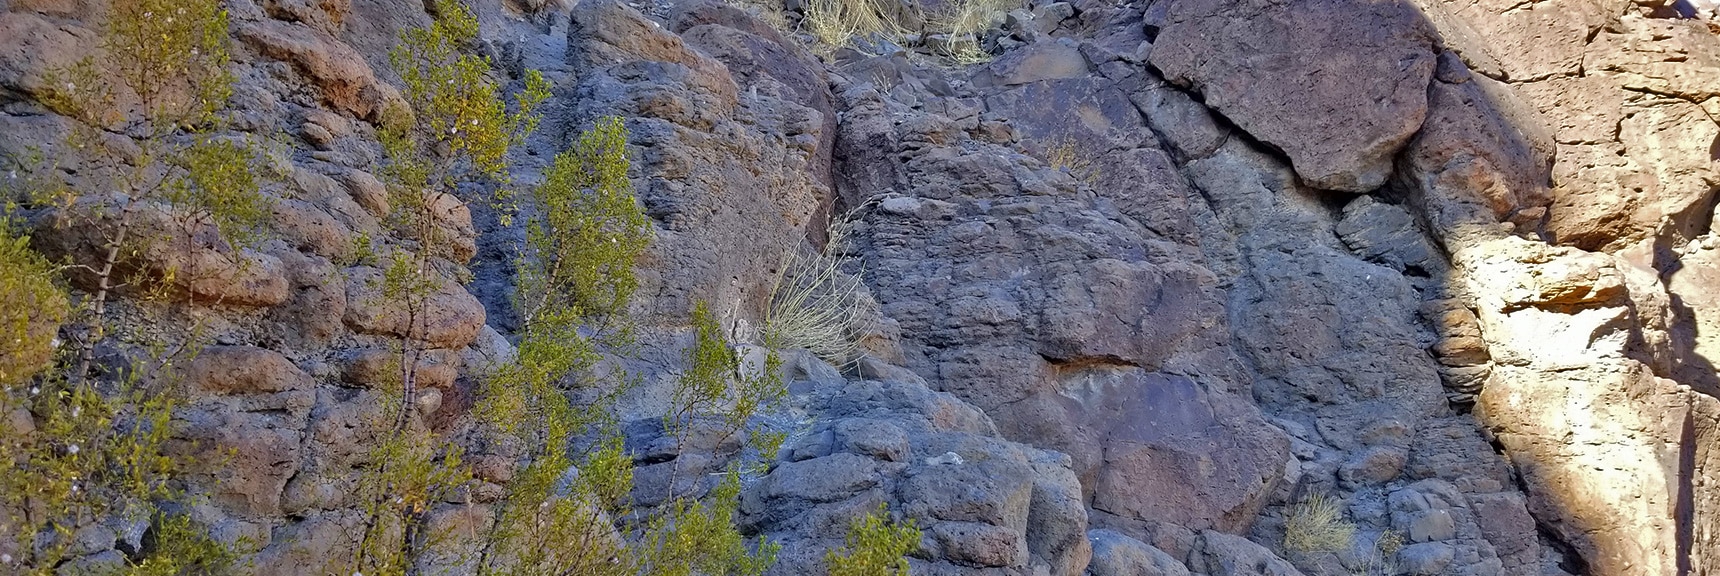 Brief 15-ft Class 3 Climb Up Lower Portion of Fortification Hill Head Wall. | Fortification Hill | Lake Mead National Recreation Area, Arizona